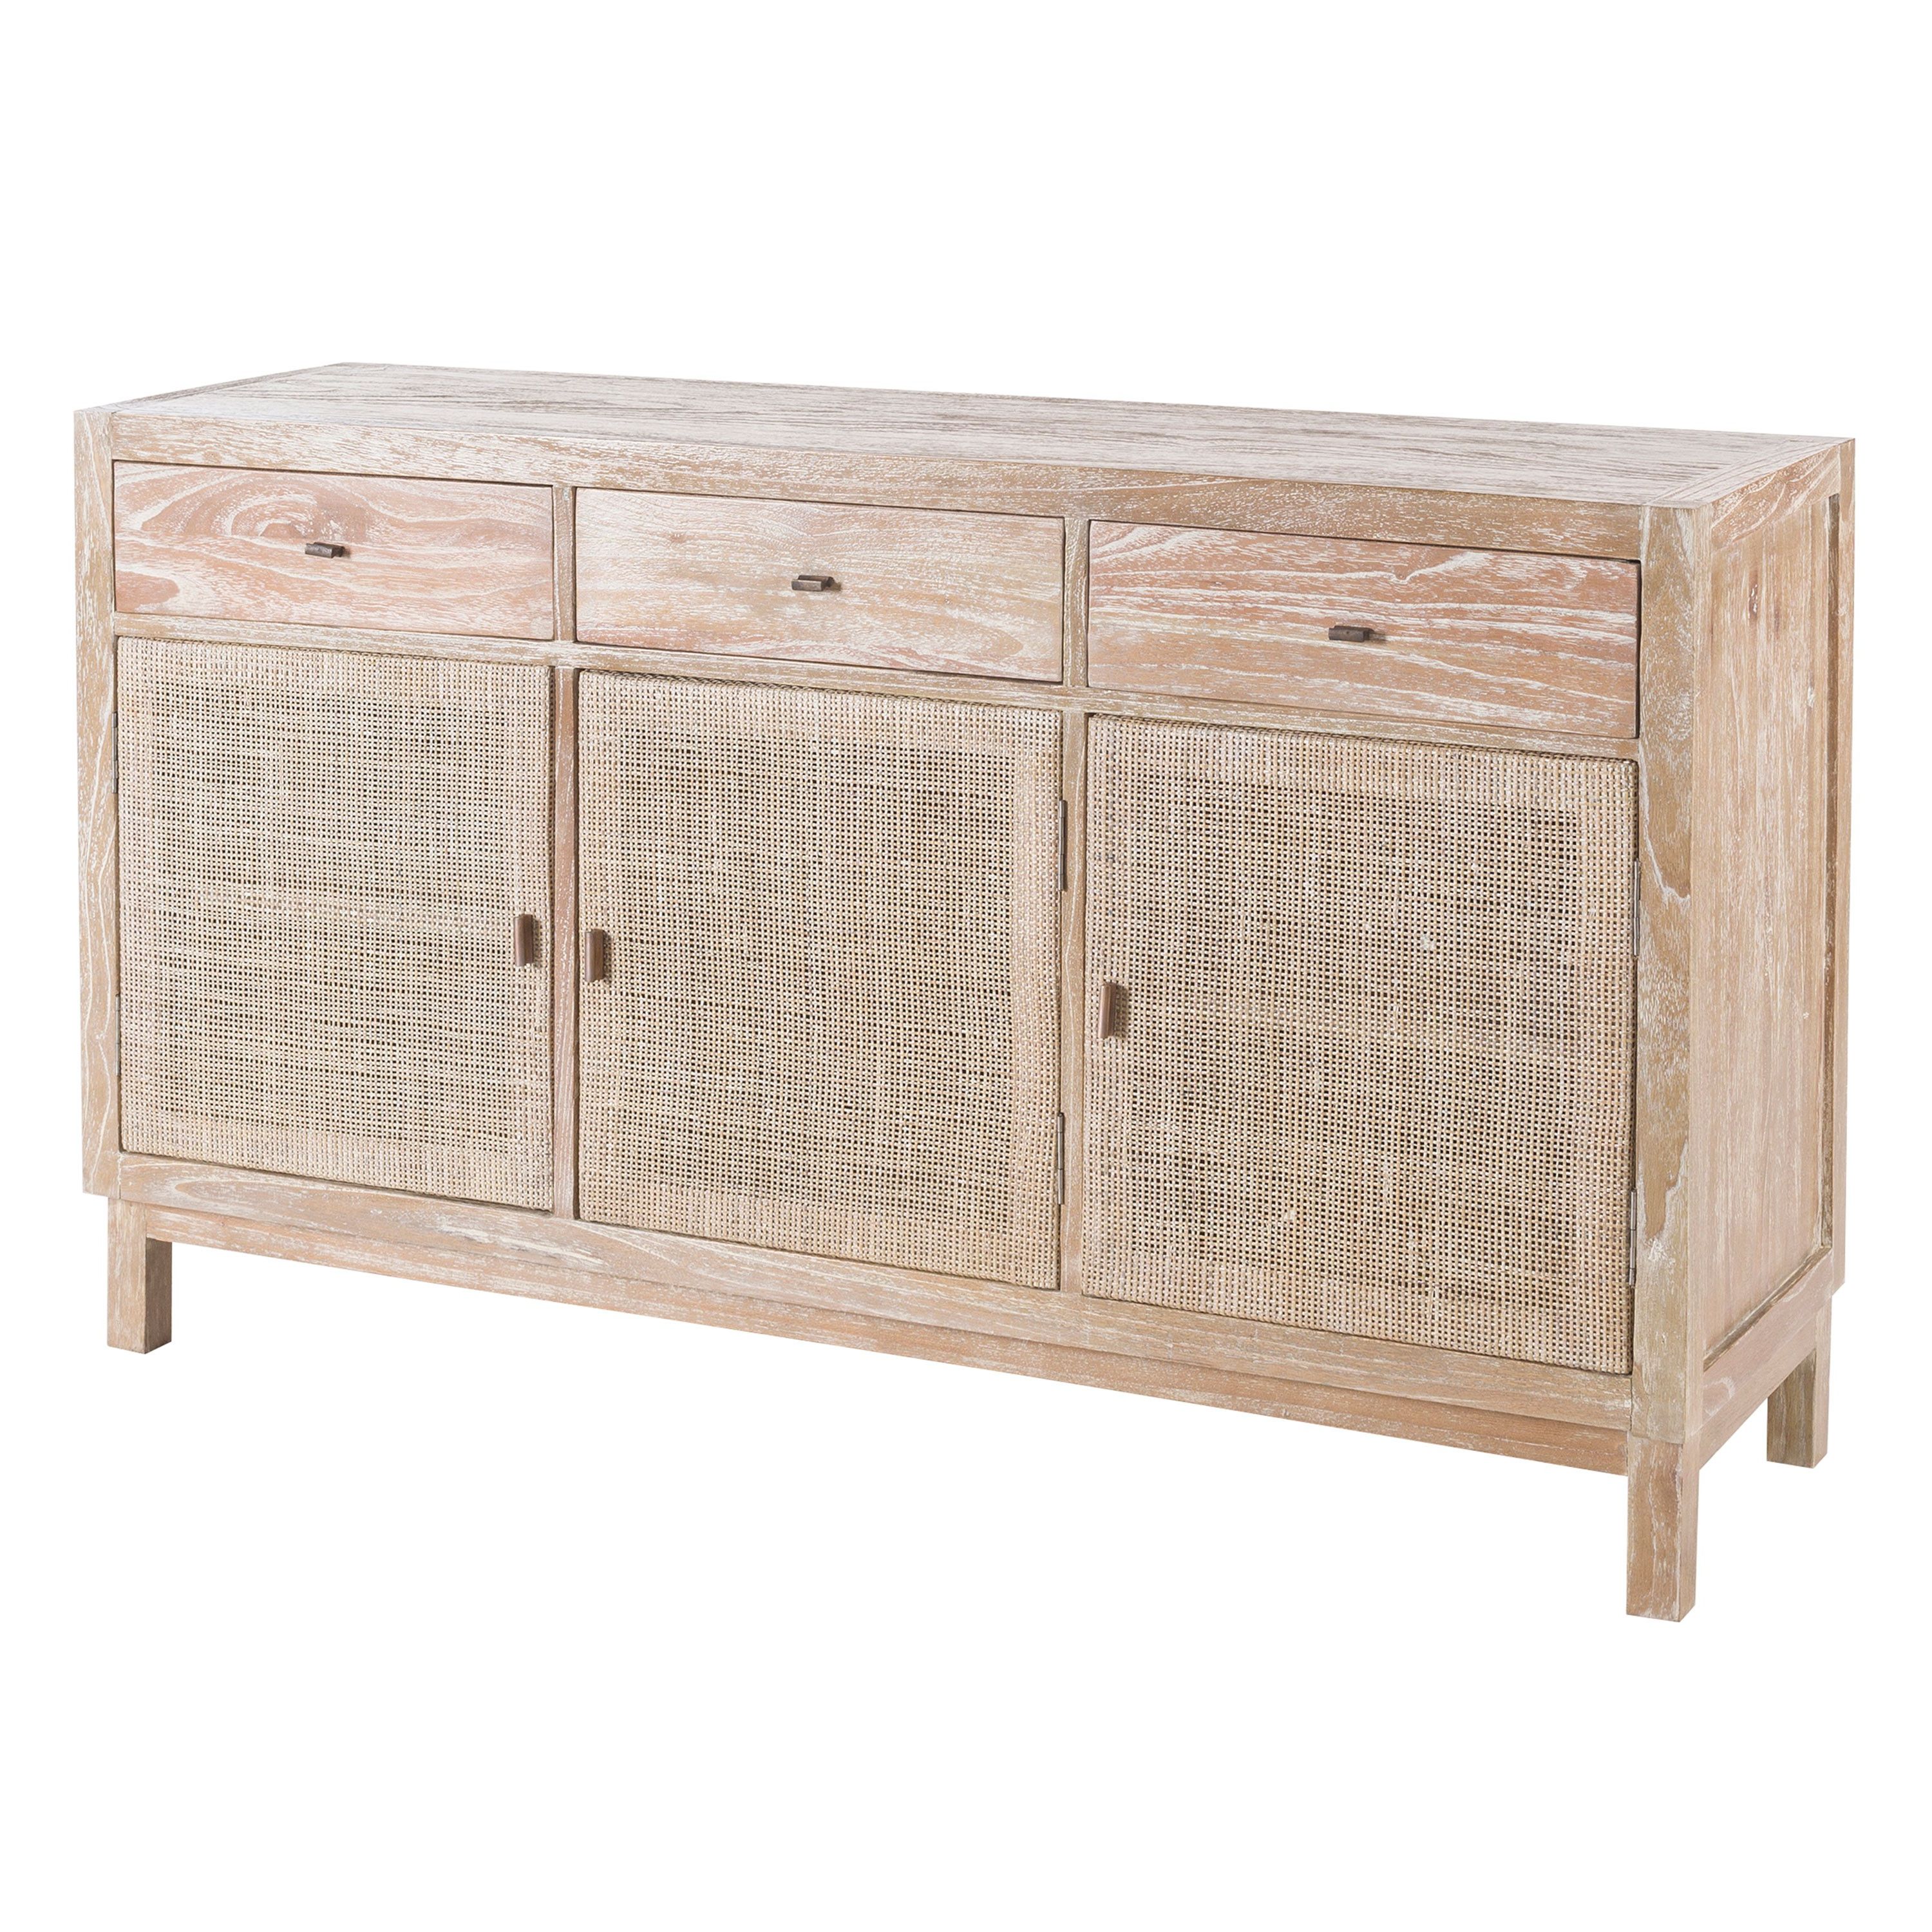 Corrugated Natural 4 Drawer Sideboards Within 2019 Williams Sideboard – Becara Tienda Online (View 18 of 20)